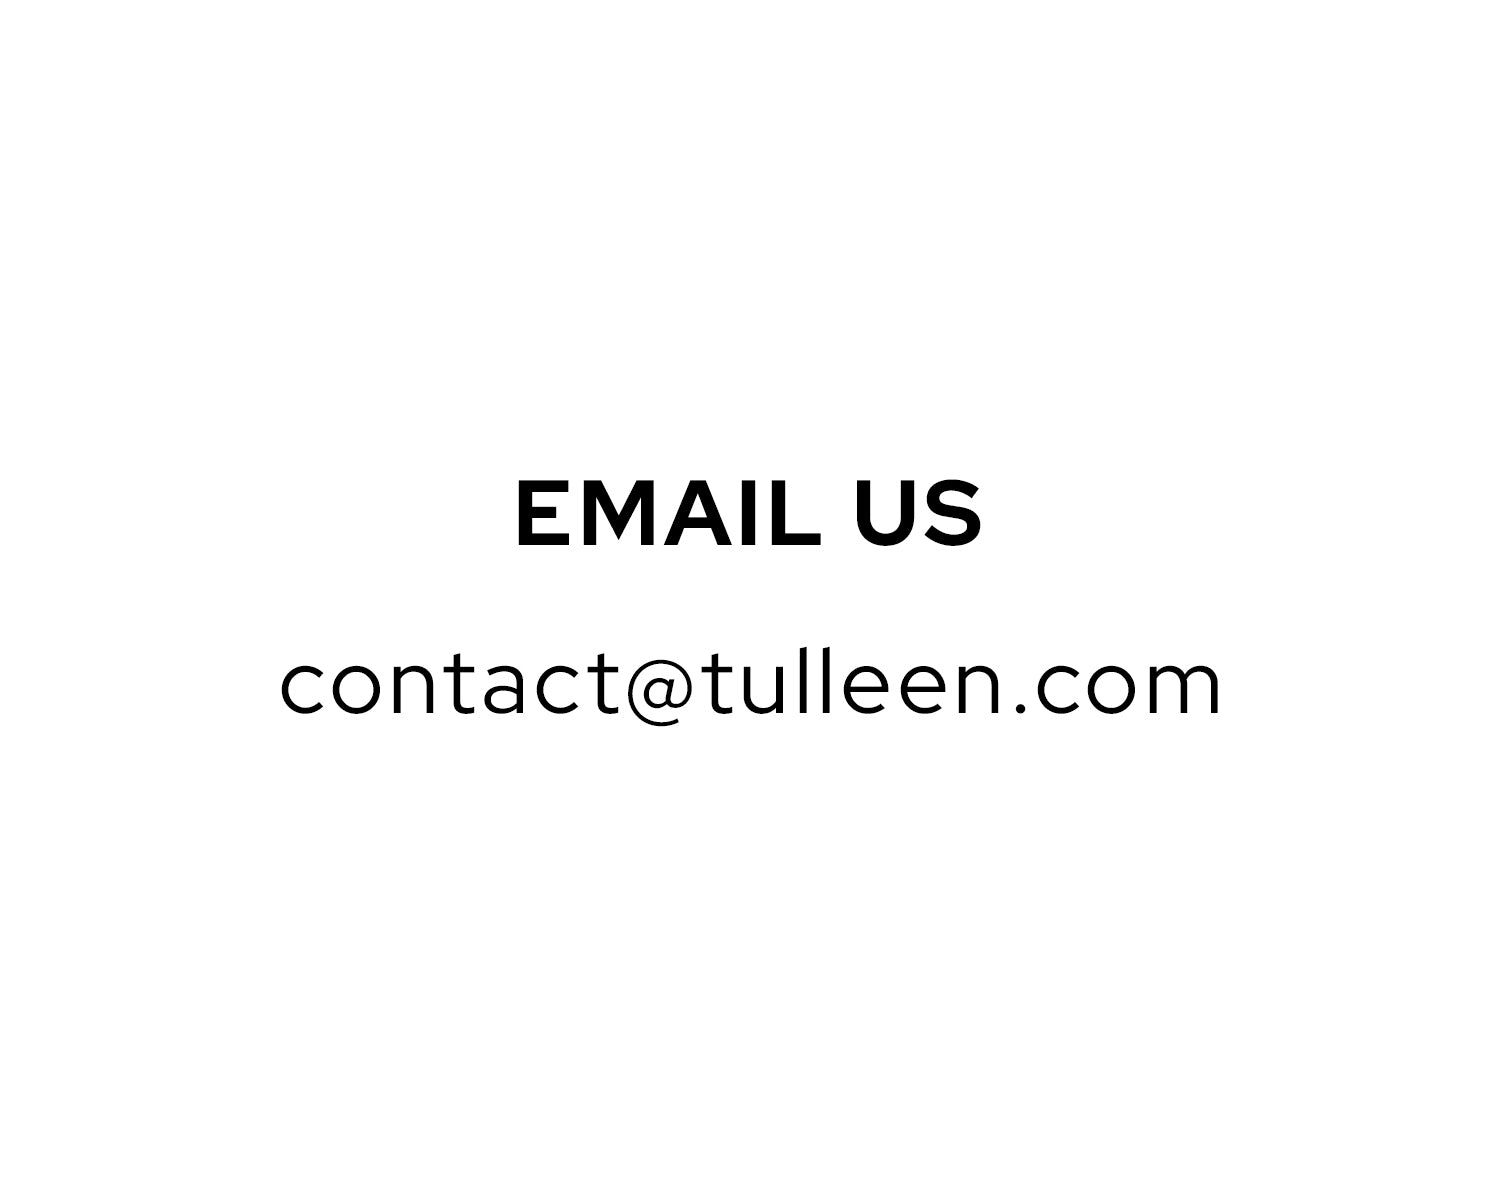 Contact Tulleen via Email